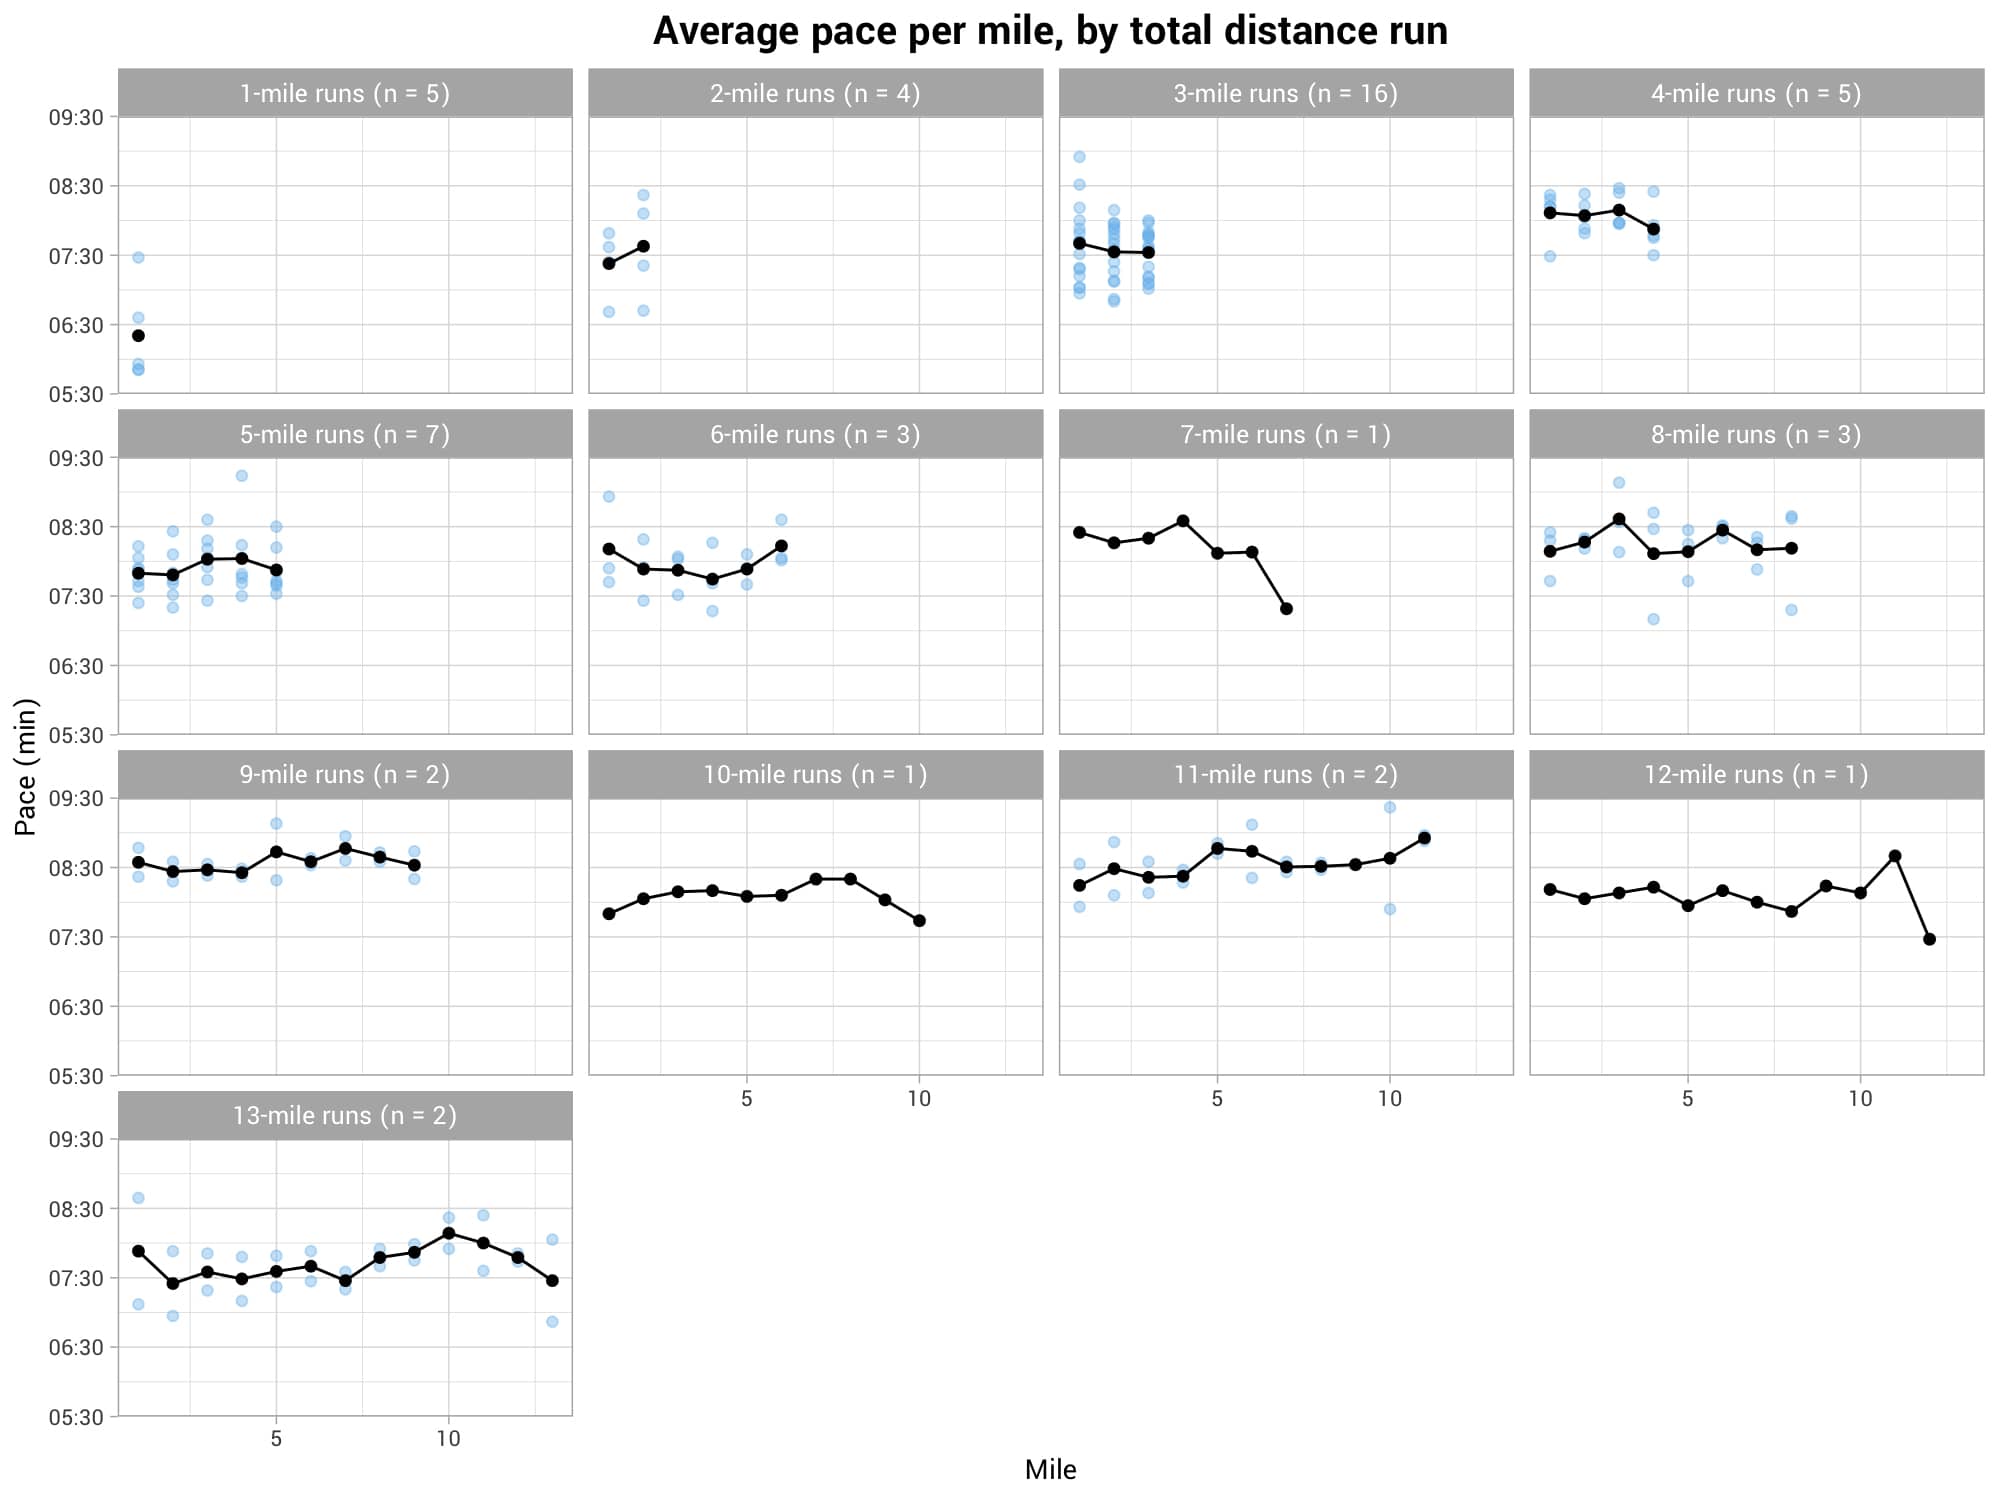 A visualization of my pace per mile for my different training runs